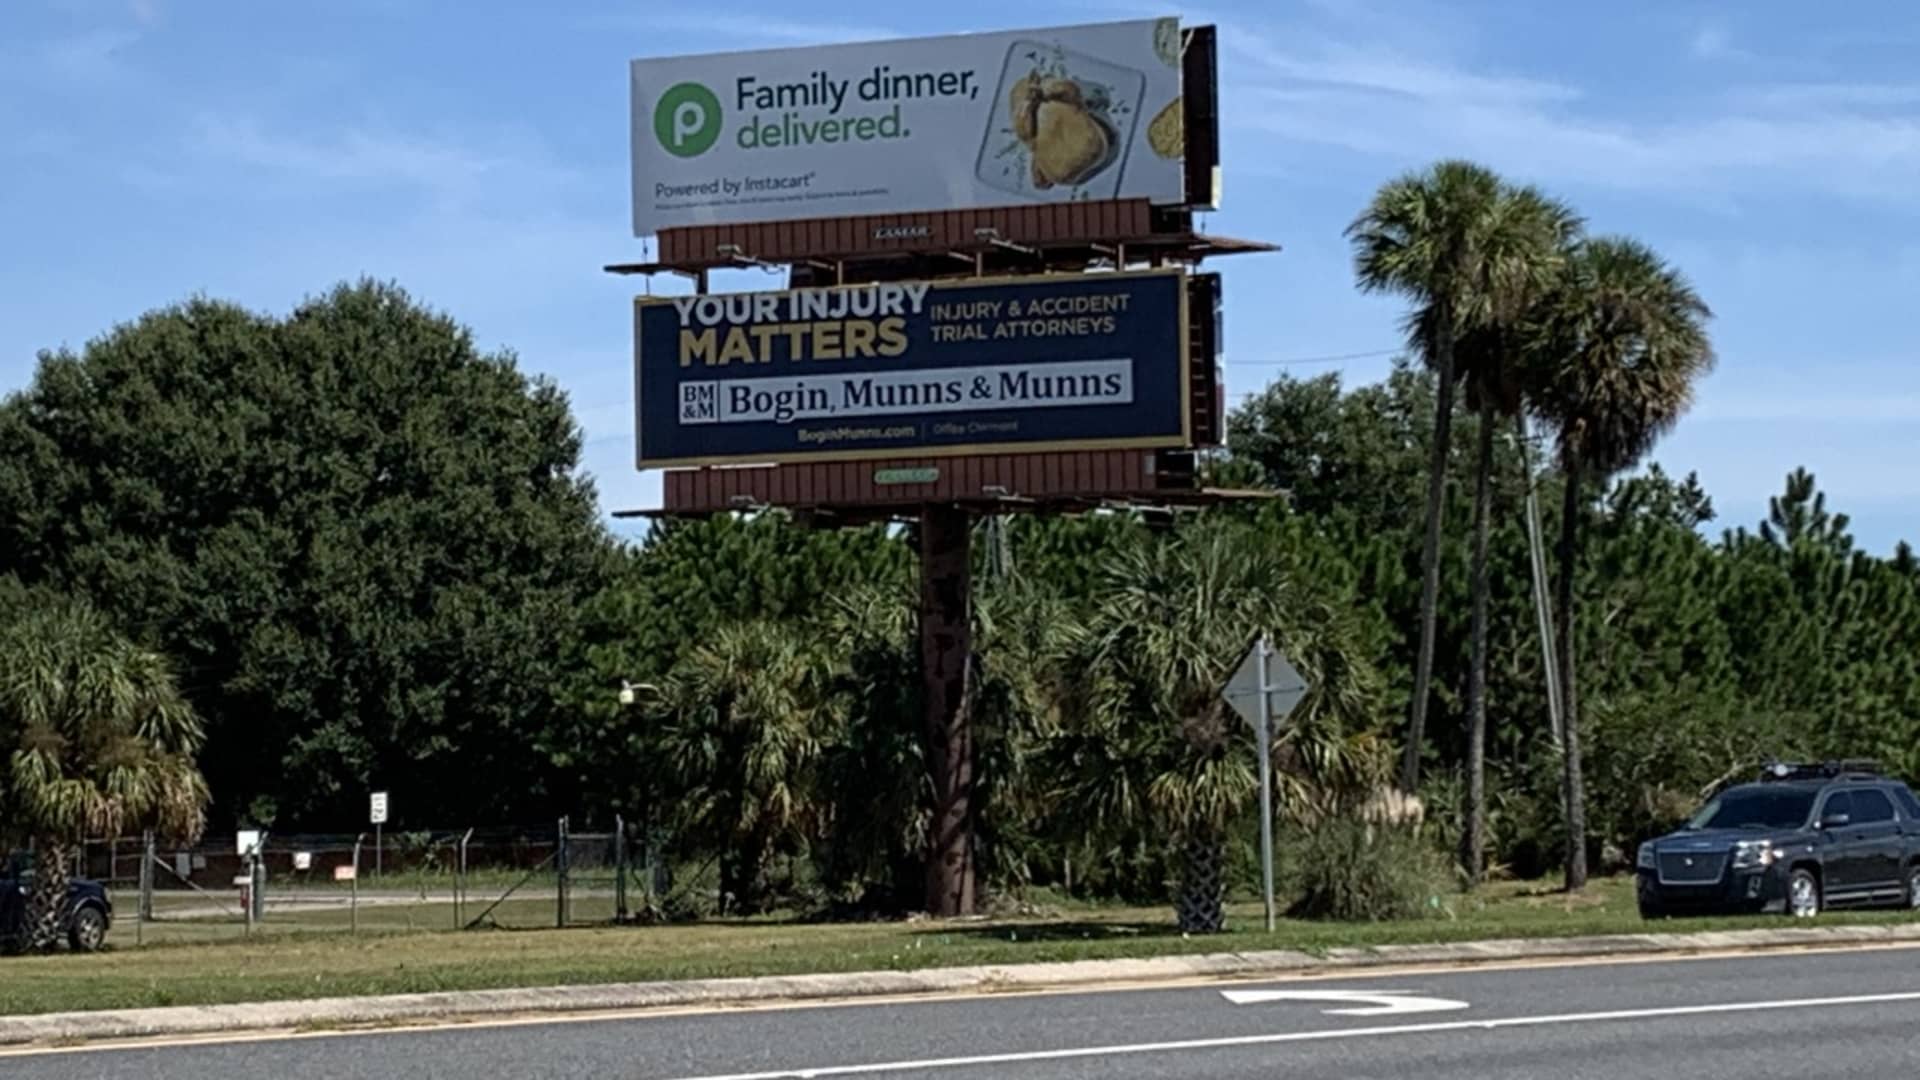 A short drive from Kroger's campus, there are signs of its competition. Publix, a regional grocer with a loyal following, has billboards that advertise its delivery service. It is powered by third-party delivery company, Instacart.